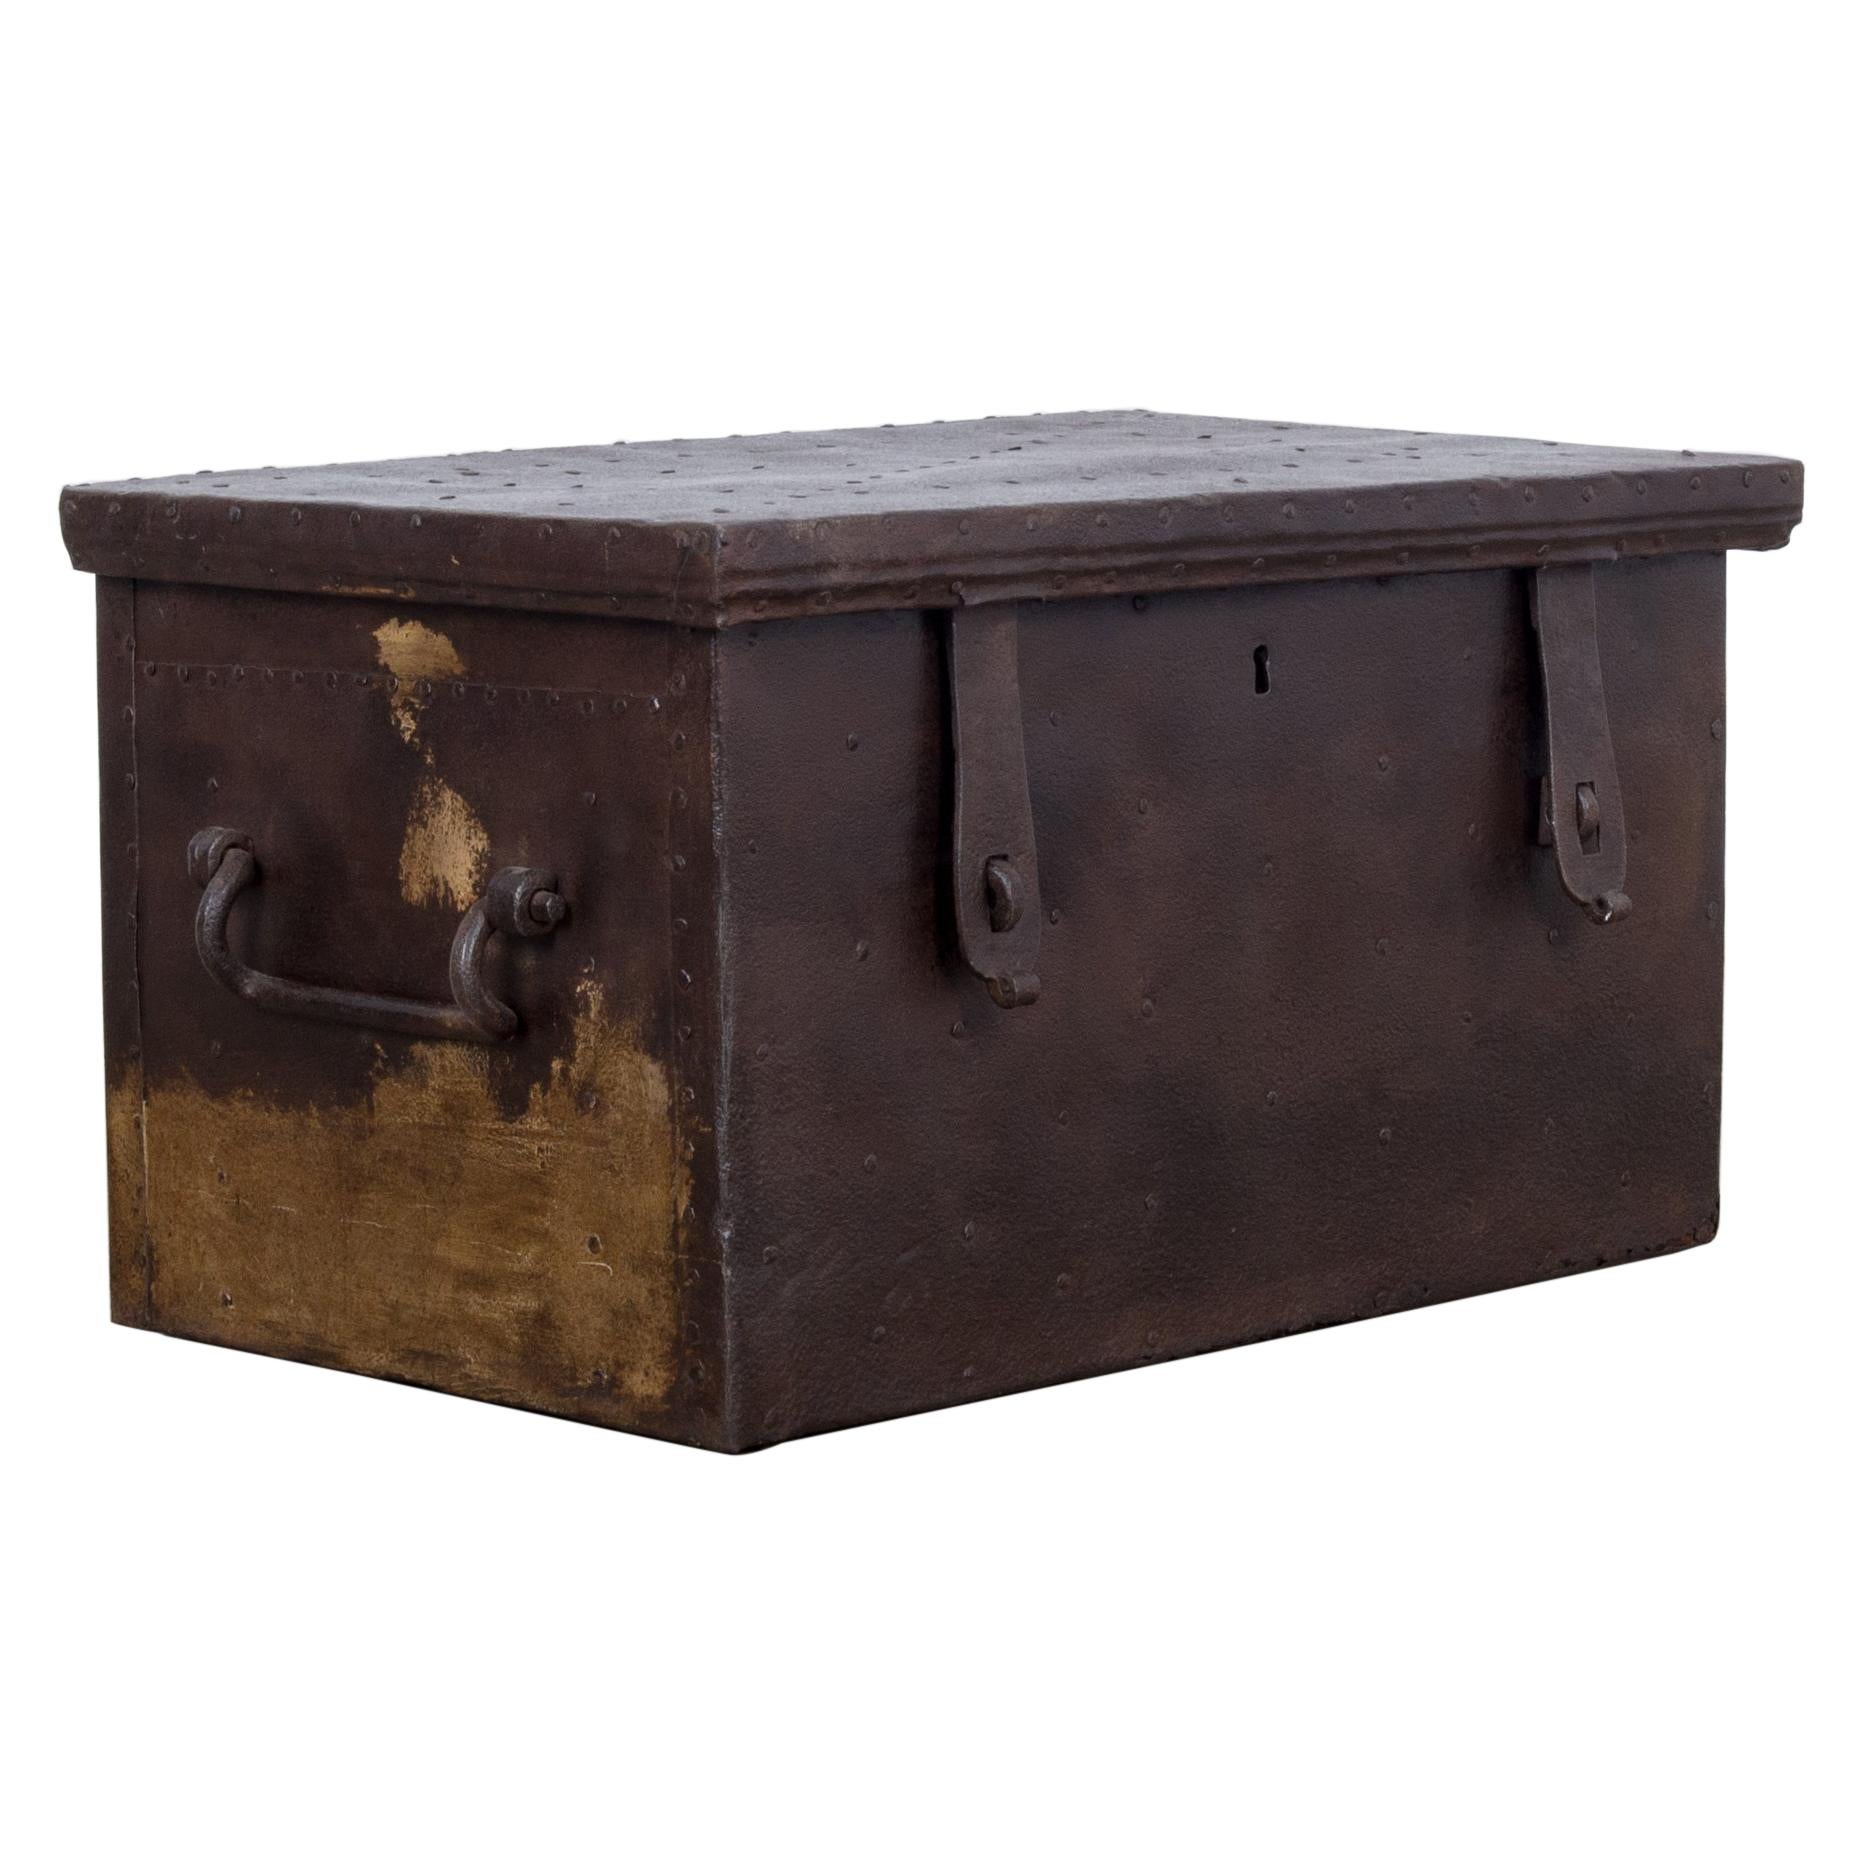 1880s French Wood and Metal Trunk